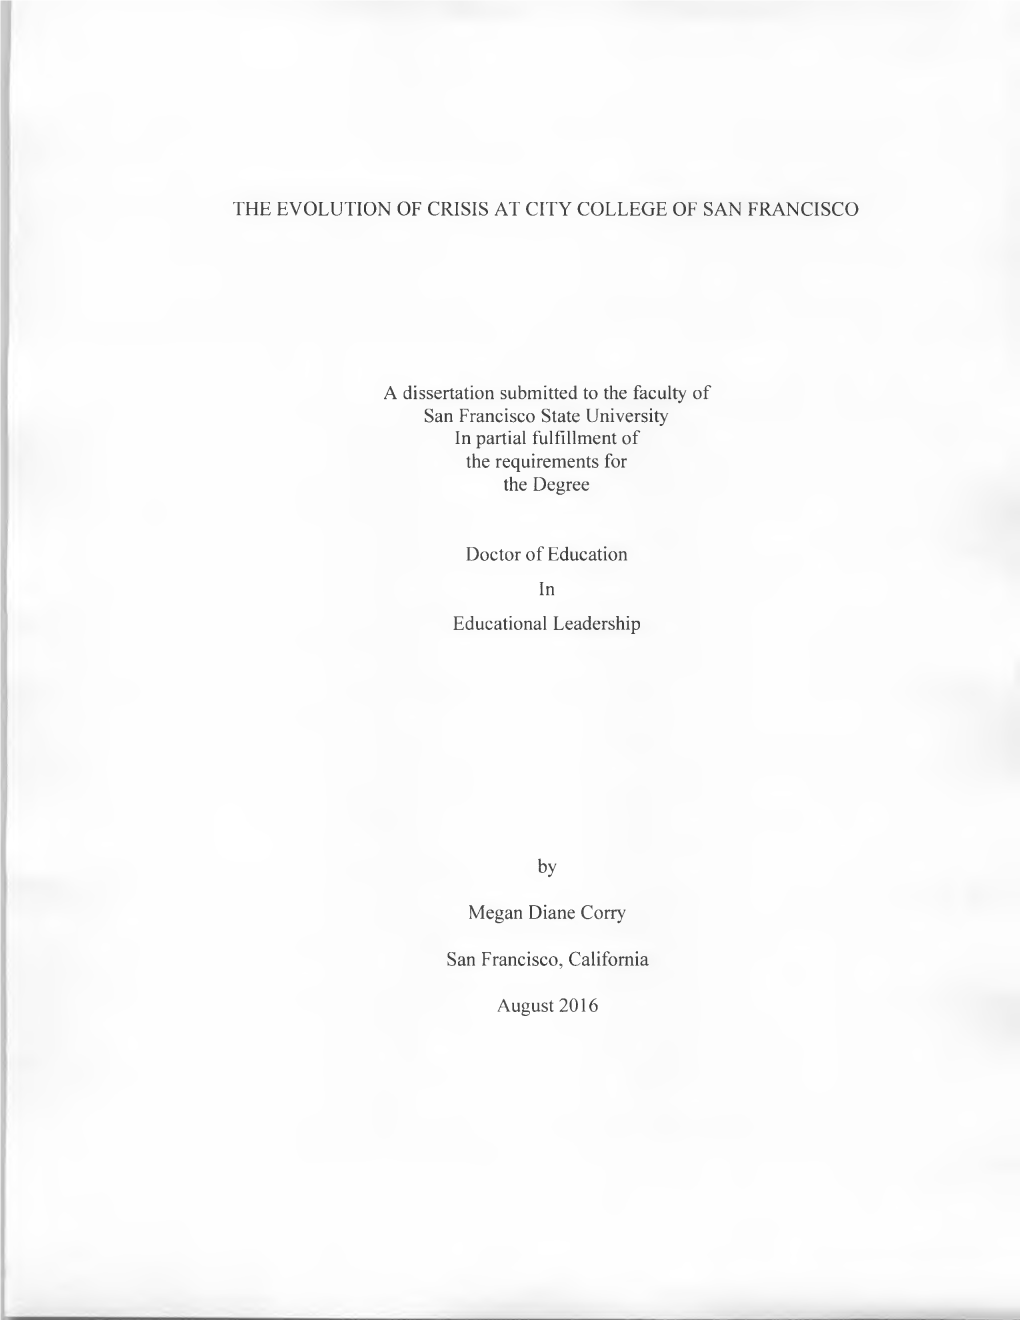 A Dissertation Submitted to the Faculty of San Francisco State University in Partial Fulfillment of the Requirements for the Degree